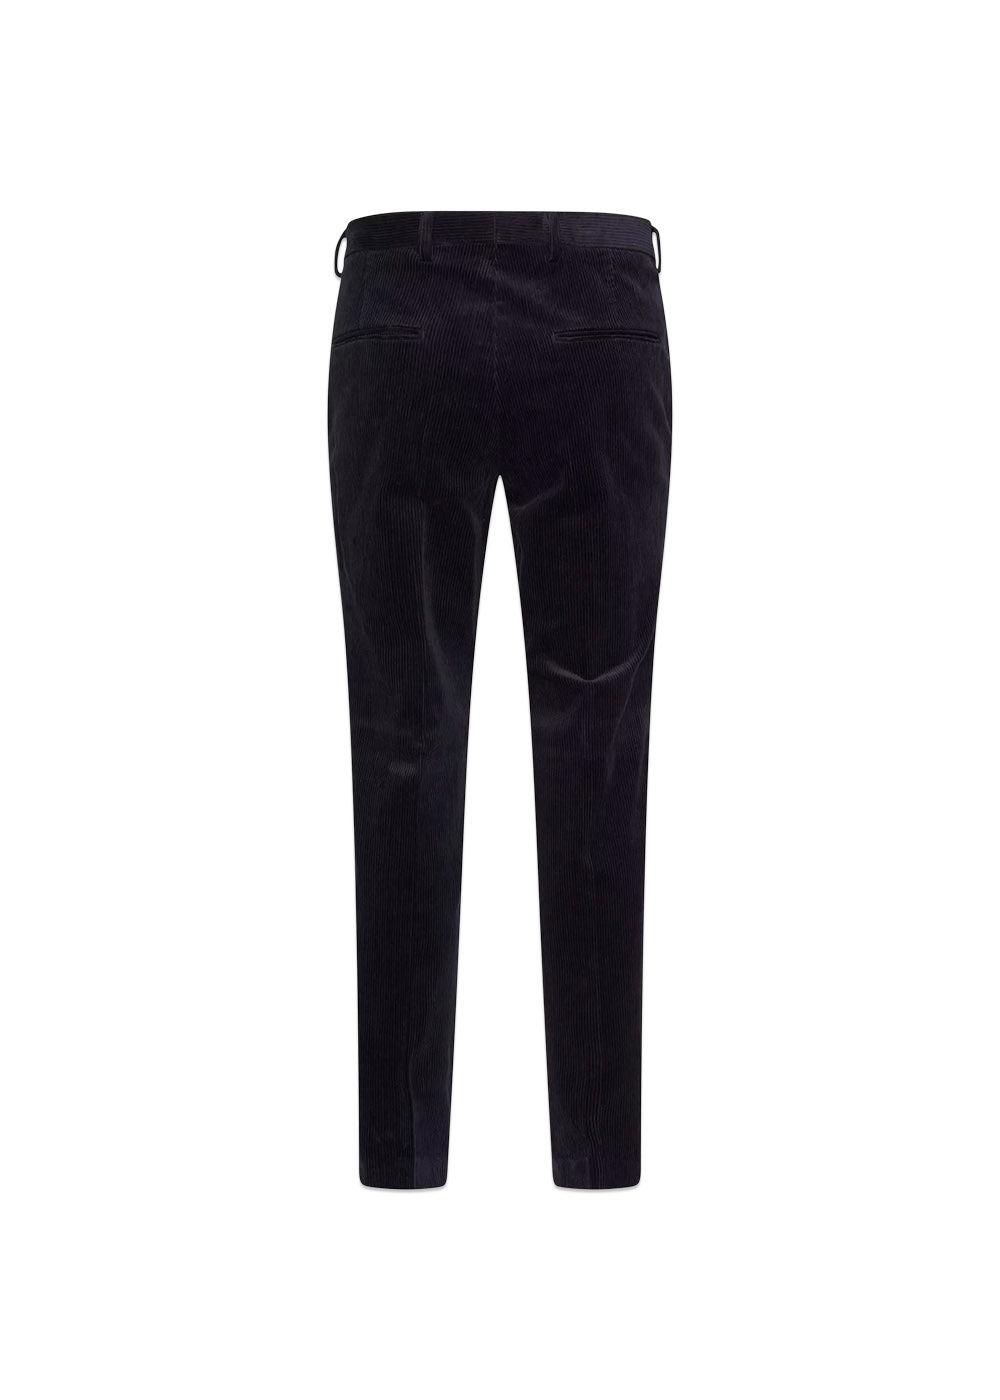 Denz Trousers - Navy